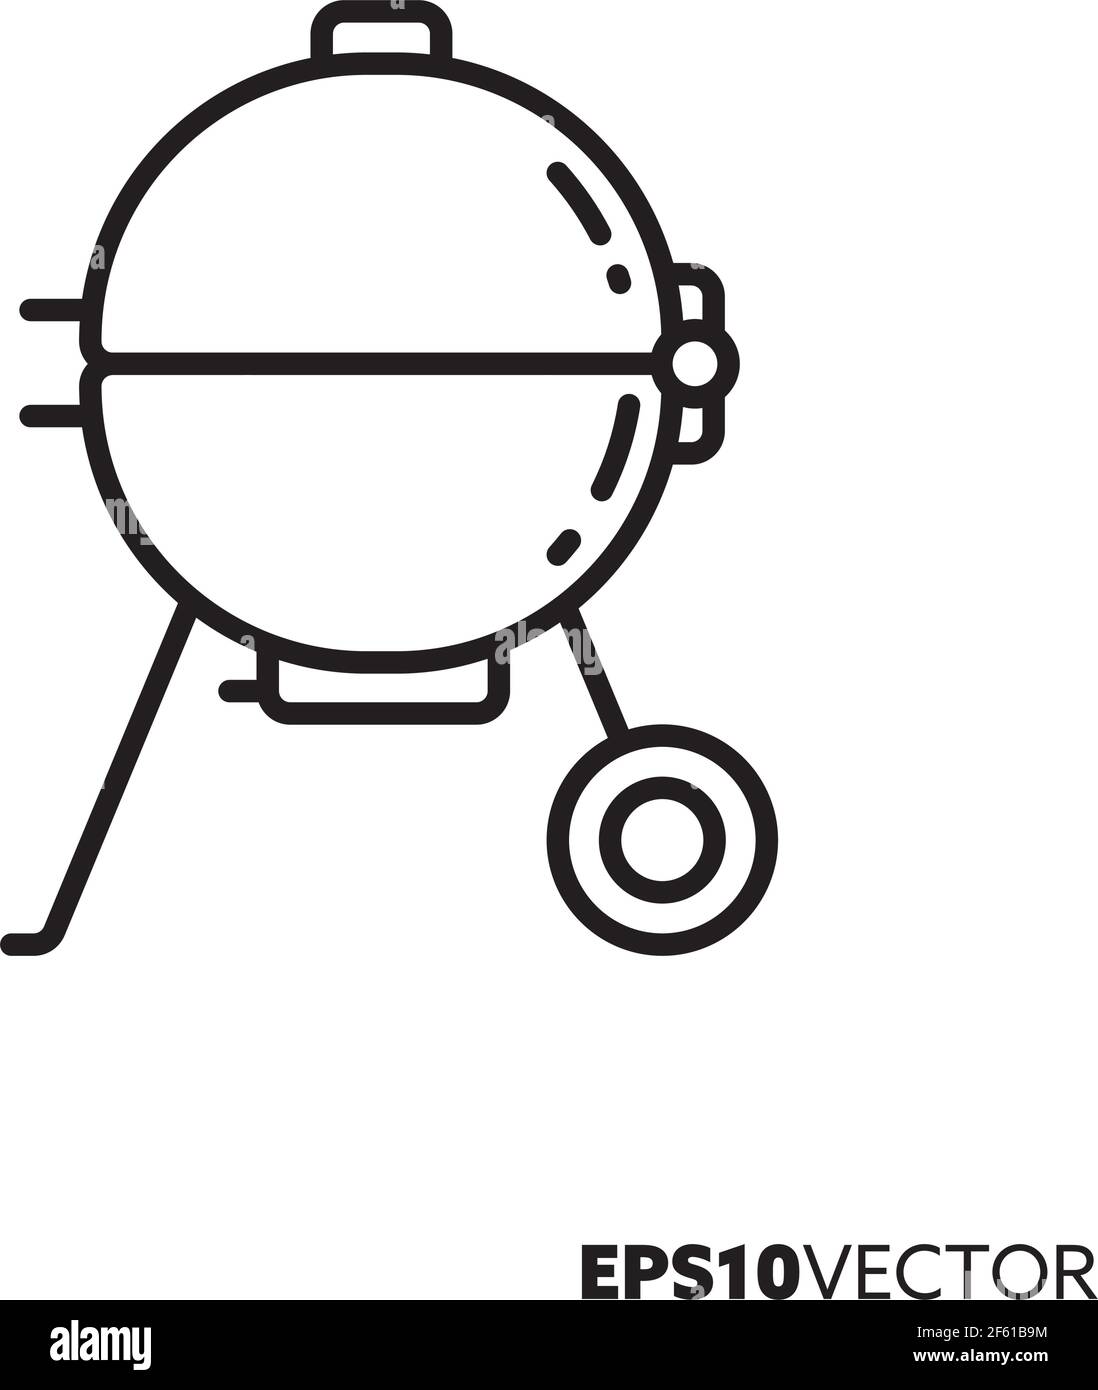 Kettle grill line icon. Outline symbol of BBQ and grilling equipment. Sphere grill flat vector illustration. Stock Vector